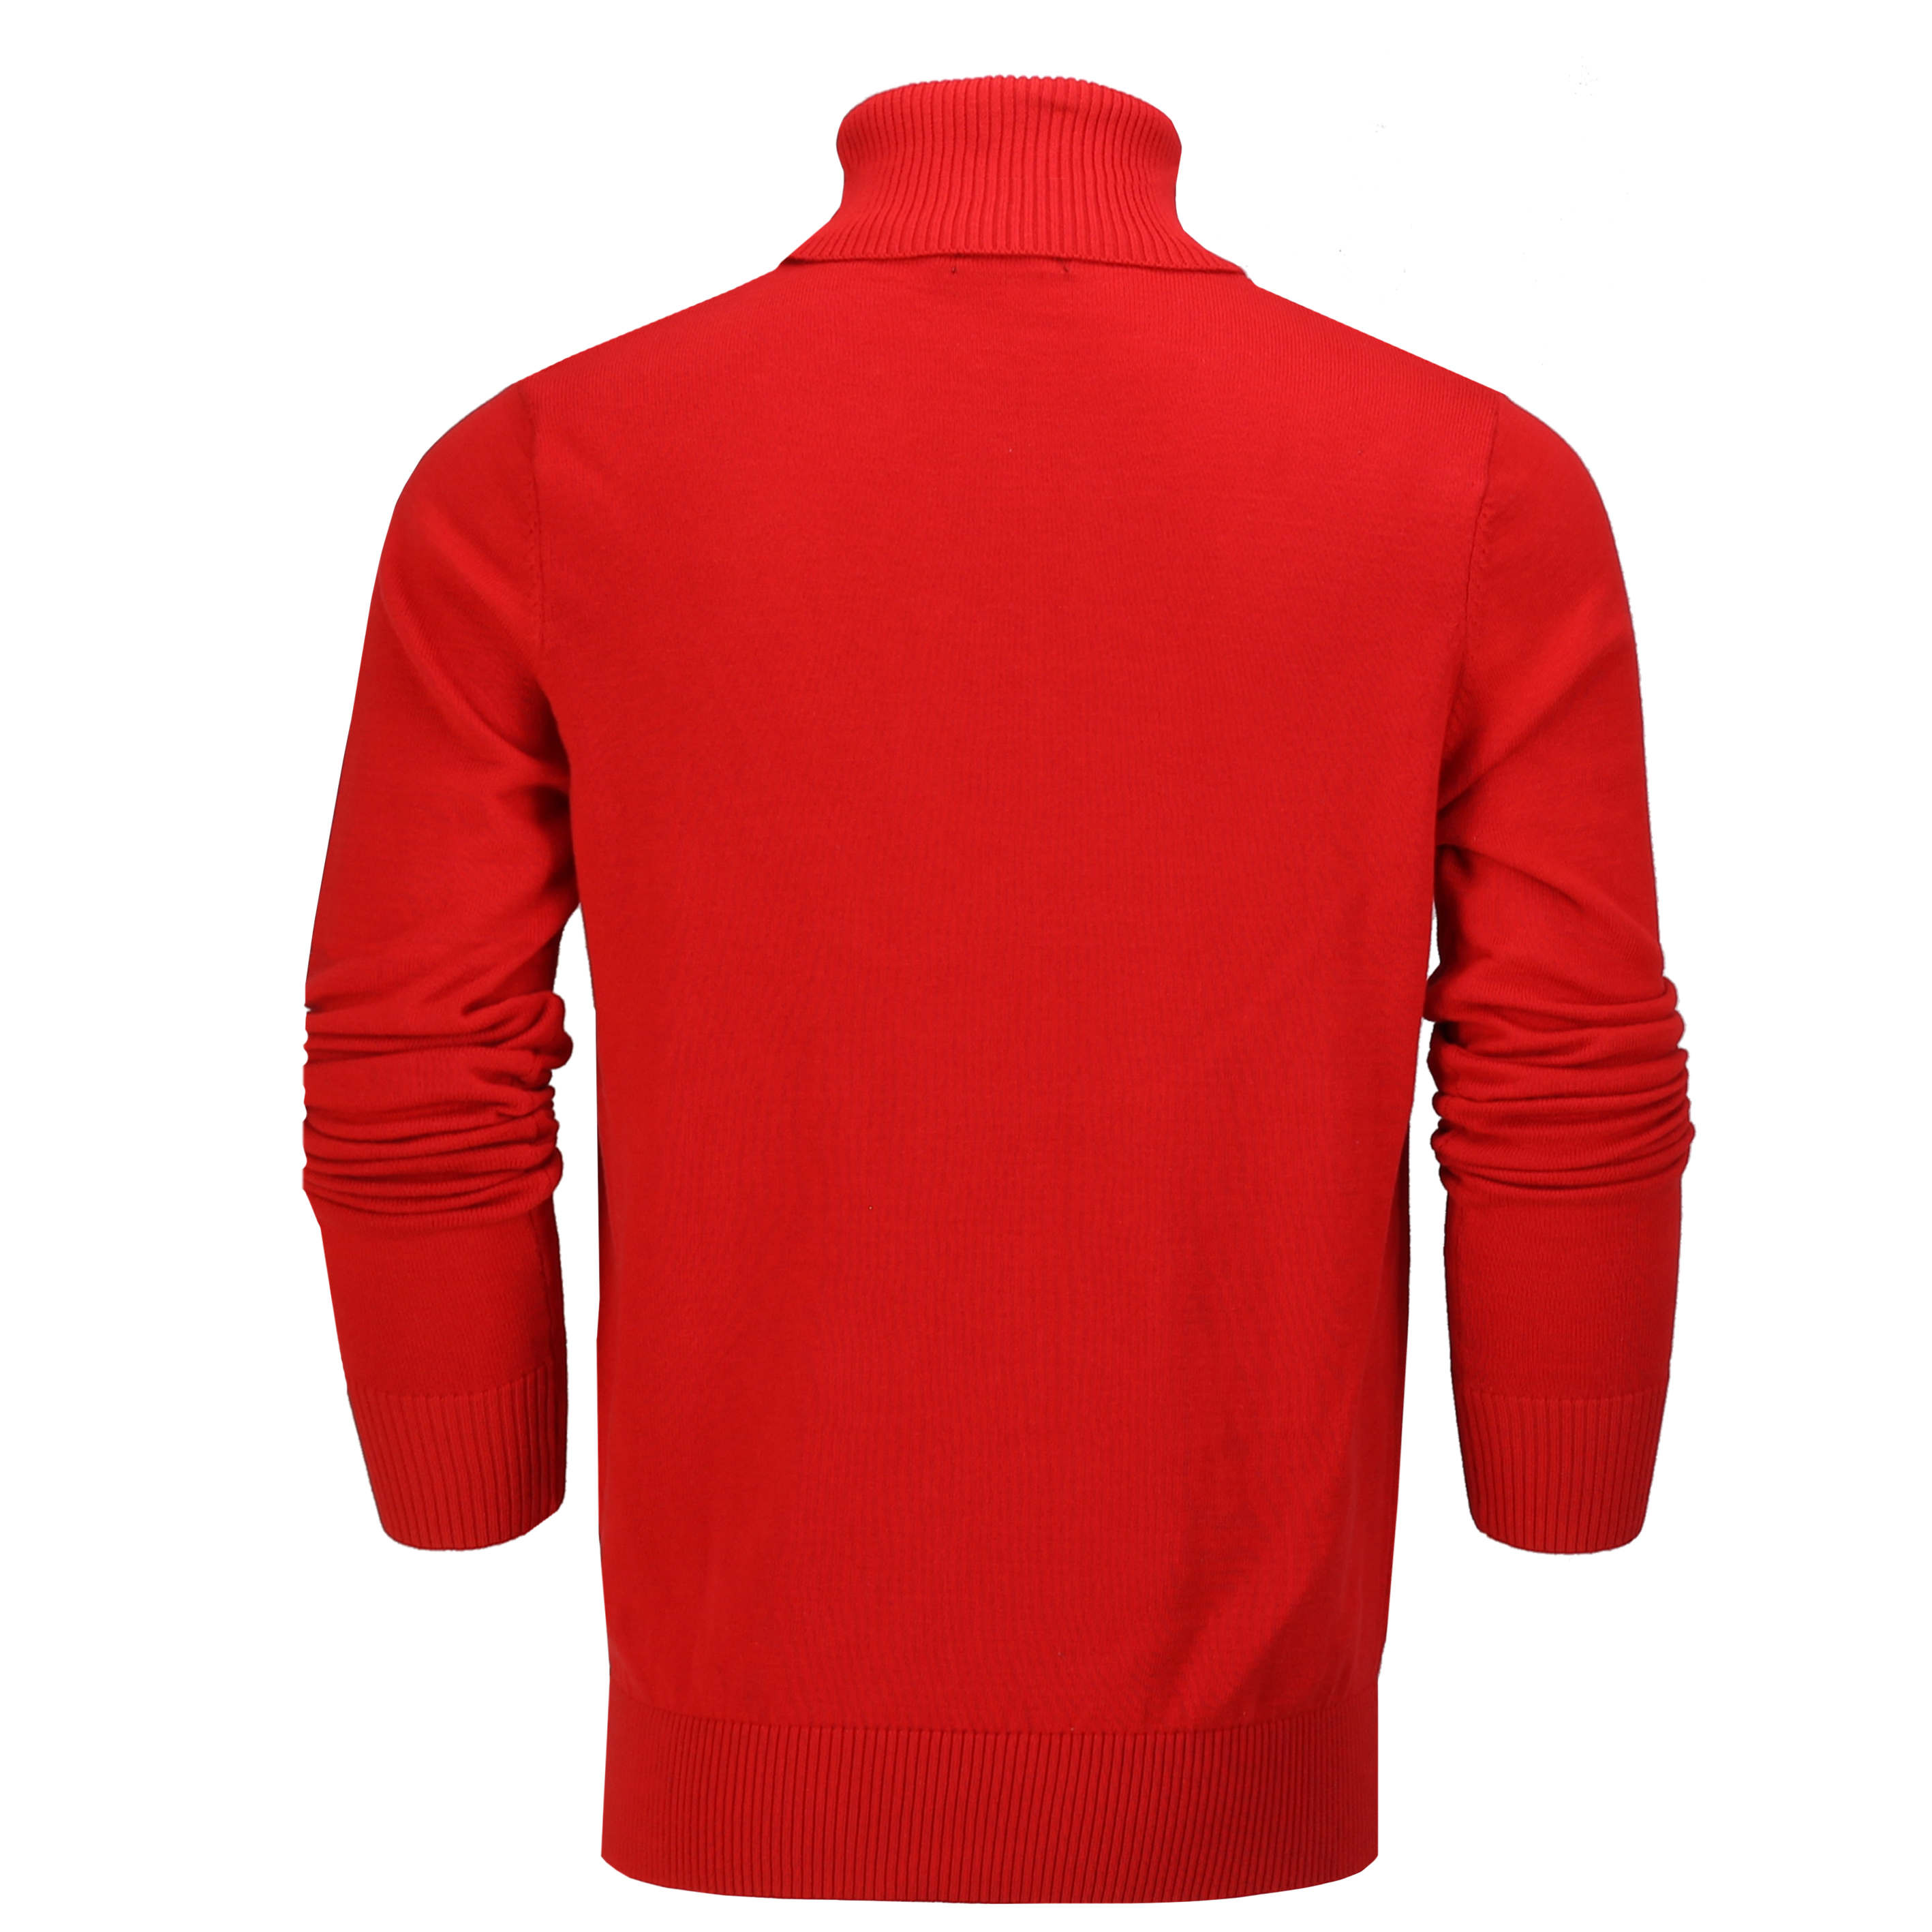 Mens Roll Neck Jumper Soft Cotton Fine Knitted High Turtle Polo ...